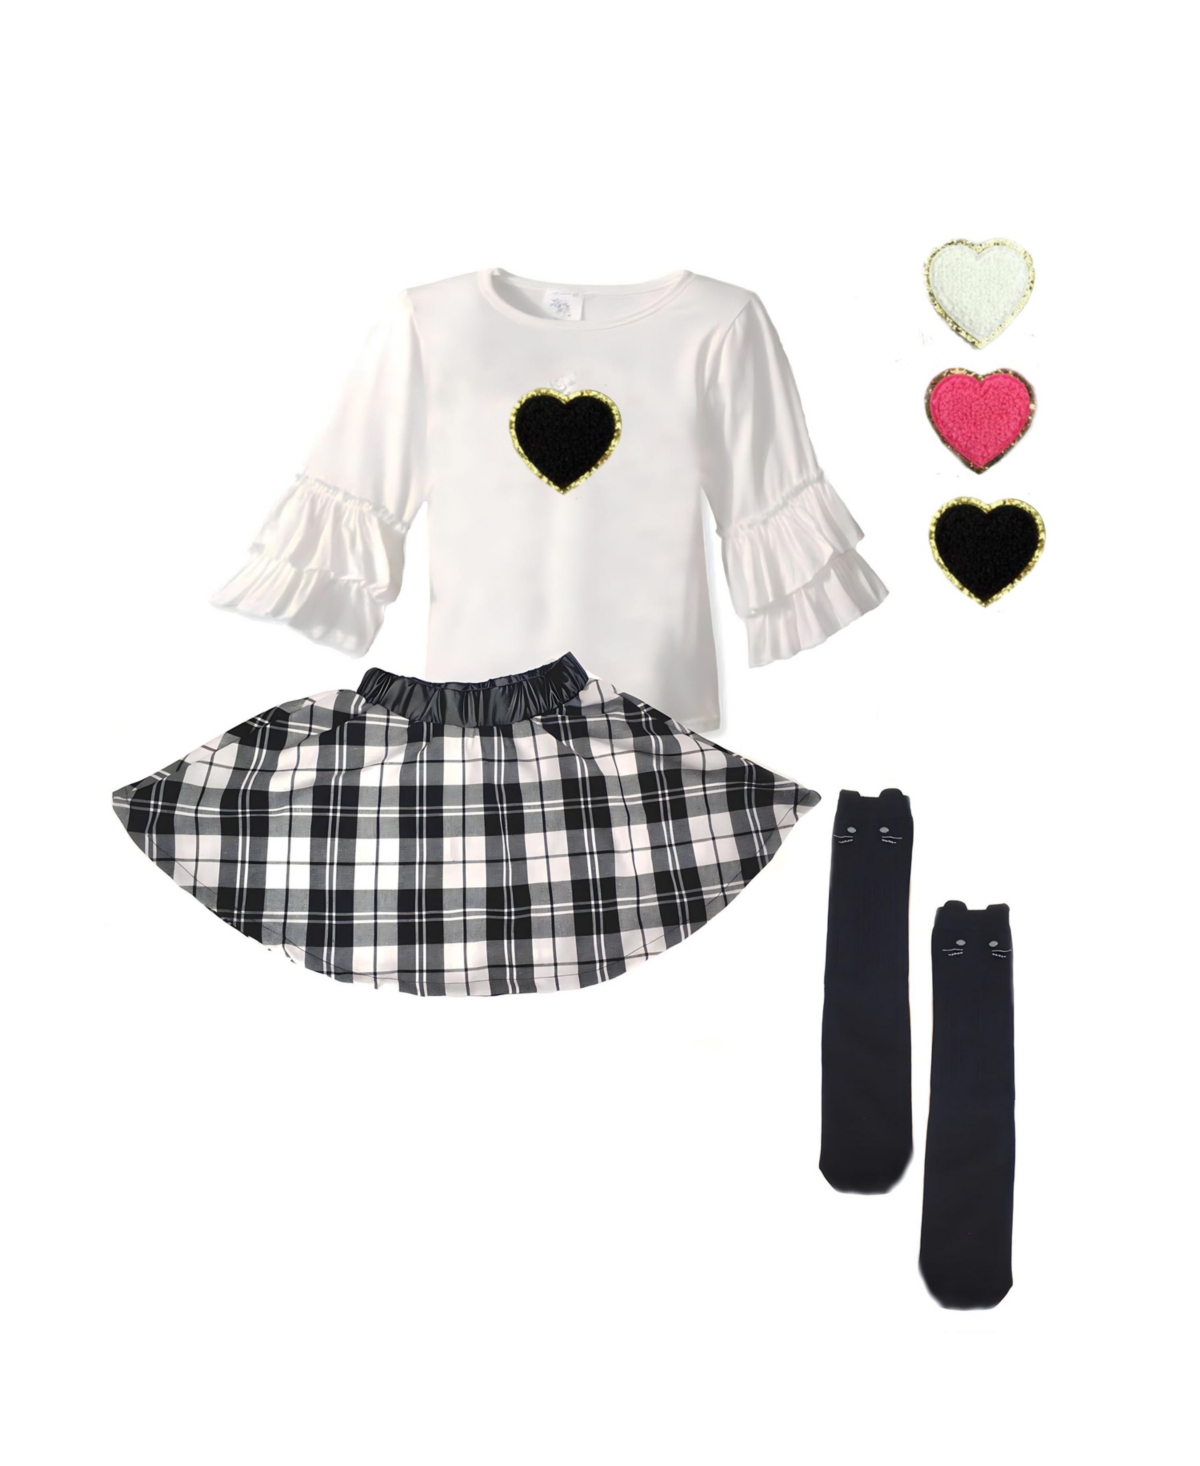 MI AMORE GIGI TODDLER, CHILD GIRLS INTERACTIVE HEART RUFFLE TOP AND SKIRT WITH KNEE SOCK SET